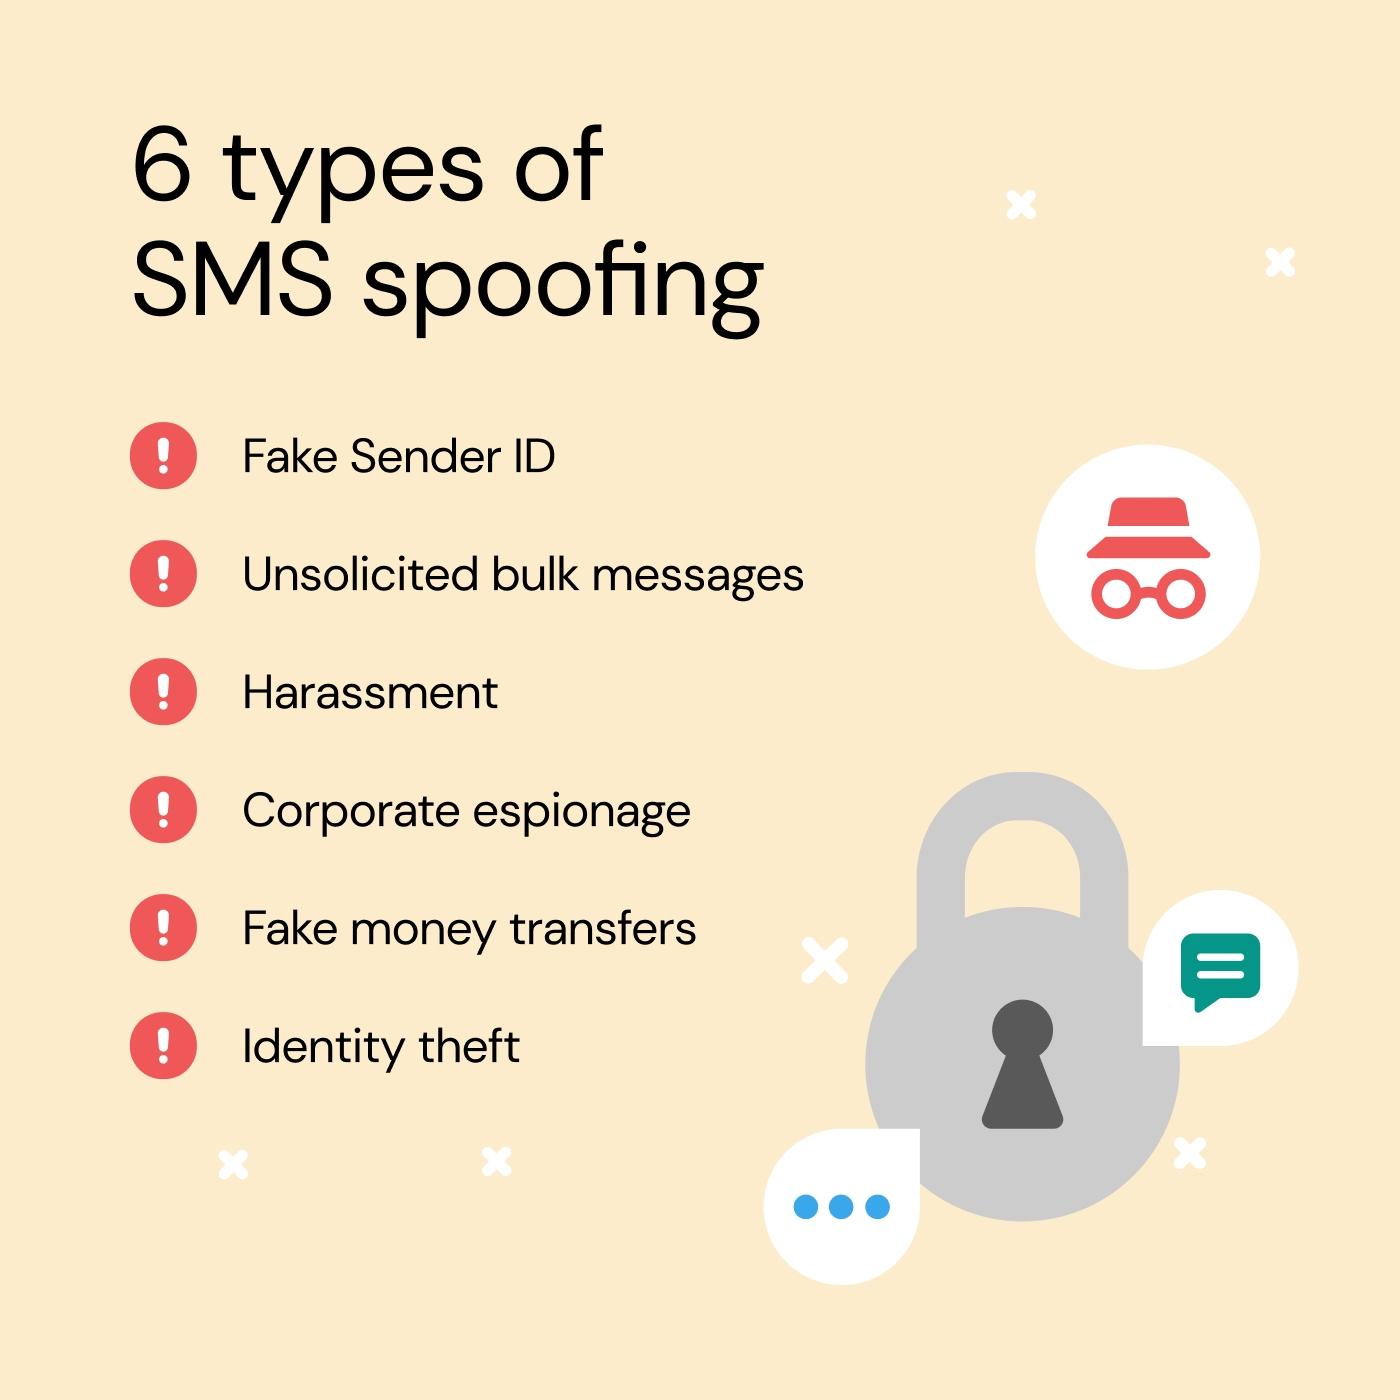 Types of SMS spoofing can include fake sender ID, unsolicited bulk messages, harrassment, and more.